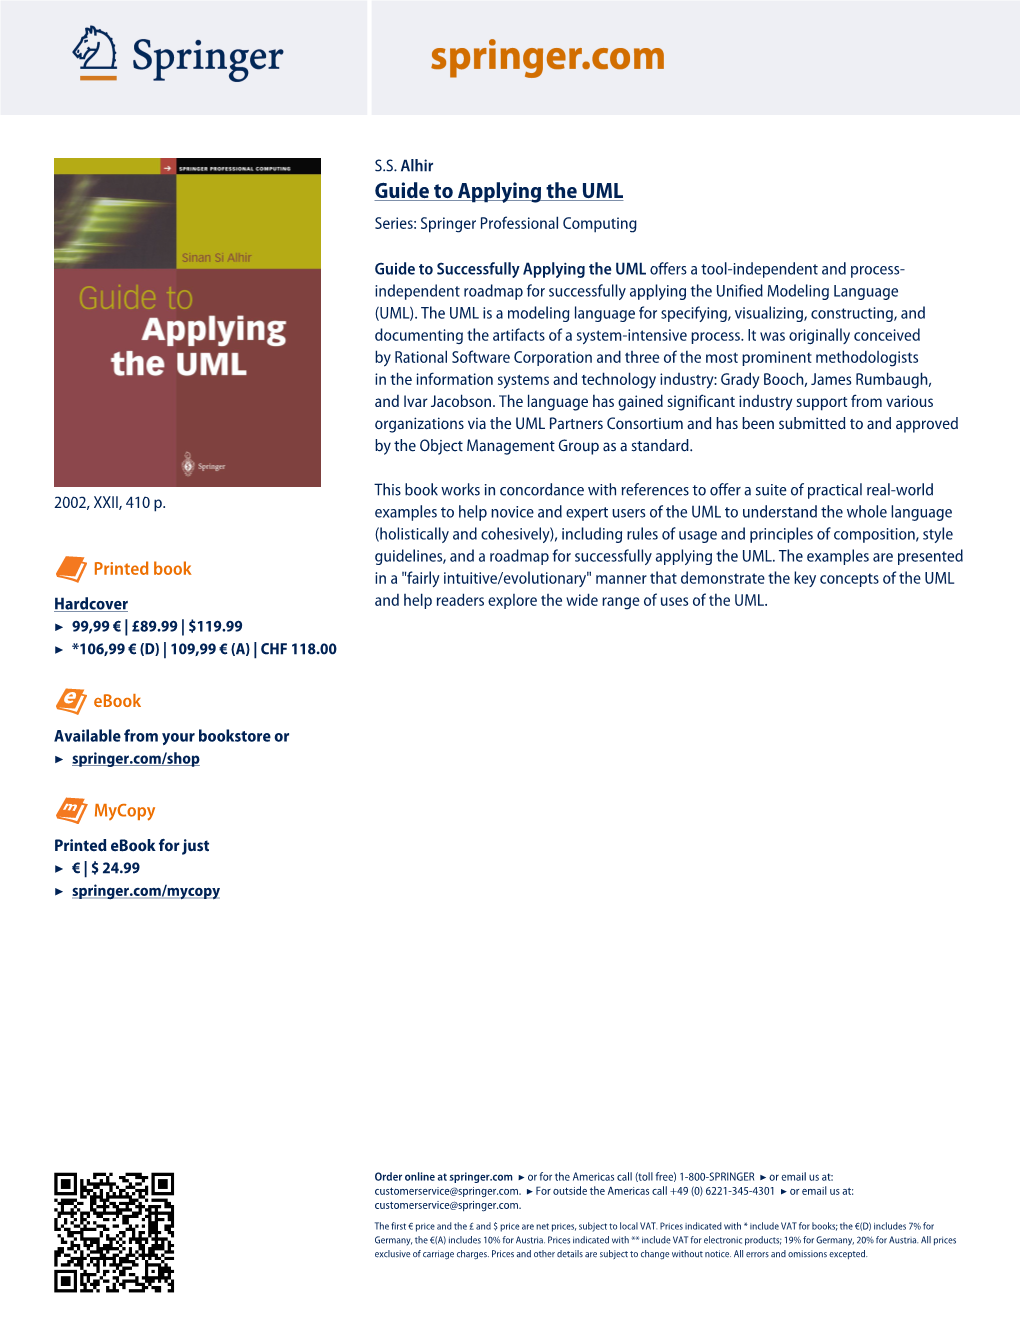 Guide to Applying the UML Series: Springer Professional Computing